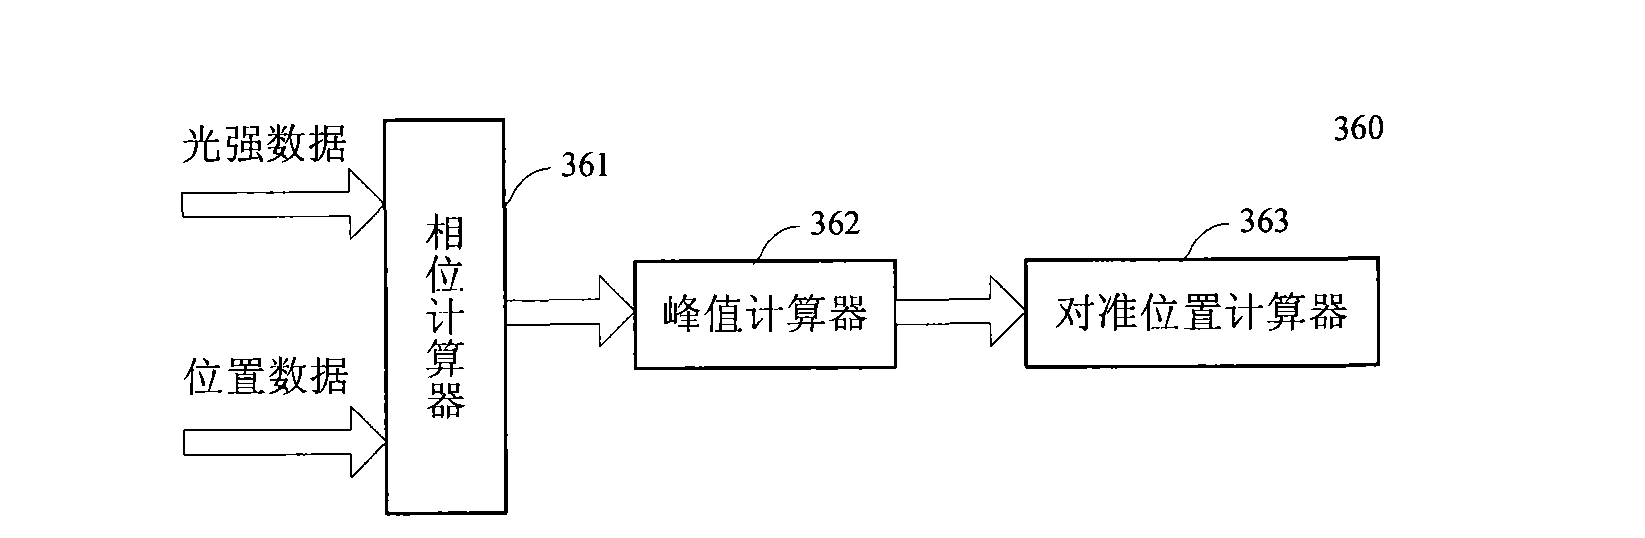 Silicon slice alignment signal collecting and processing system and processing method using the same